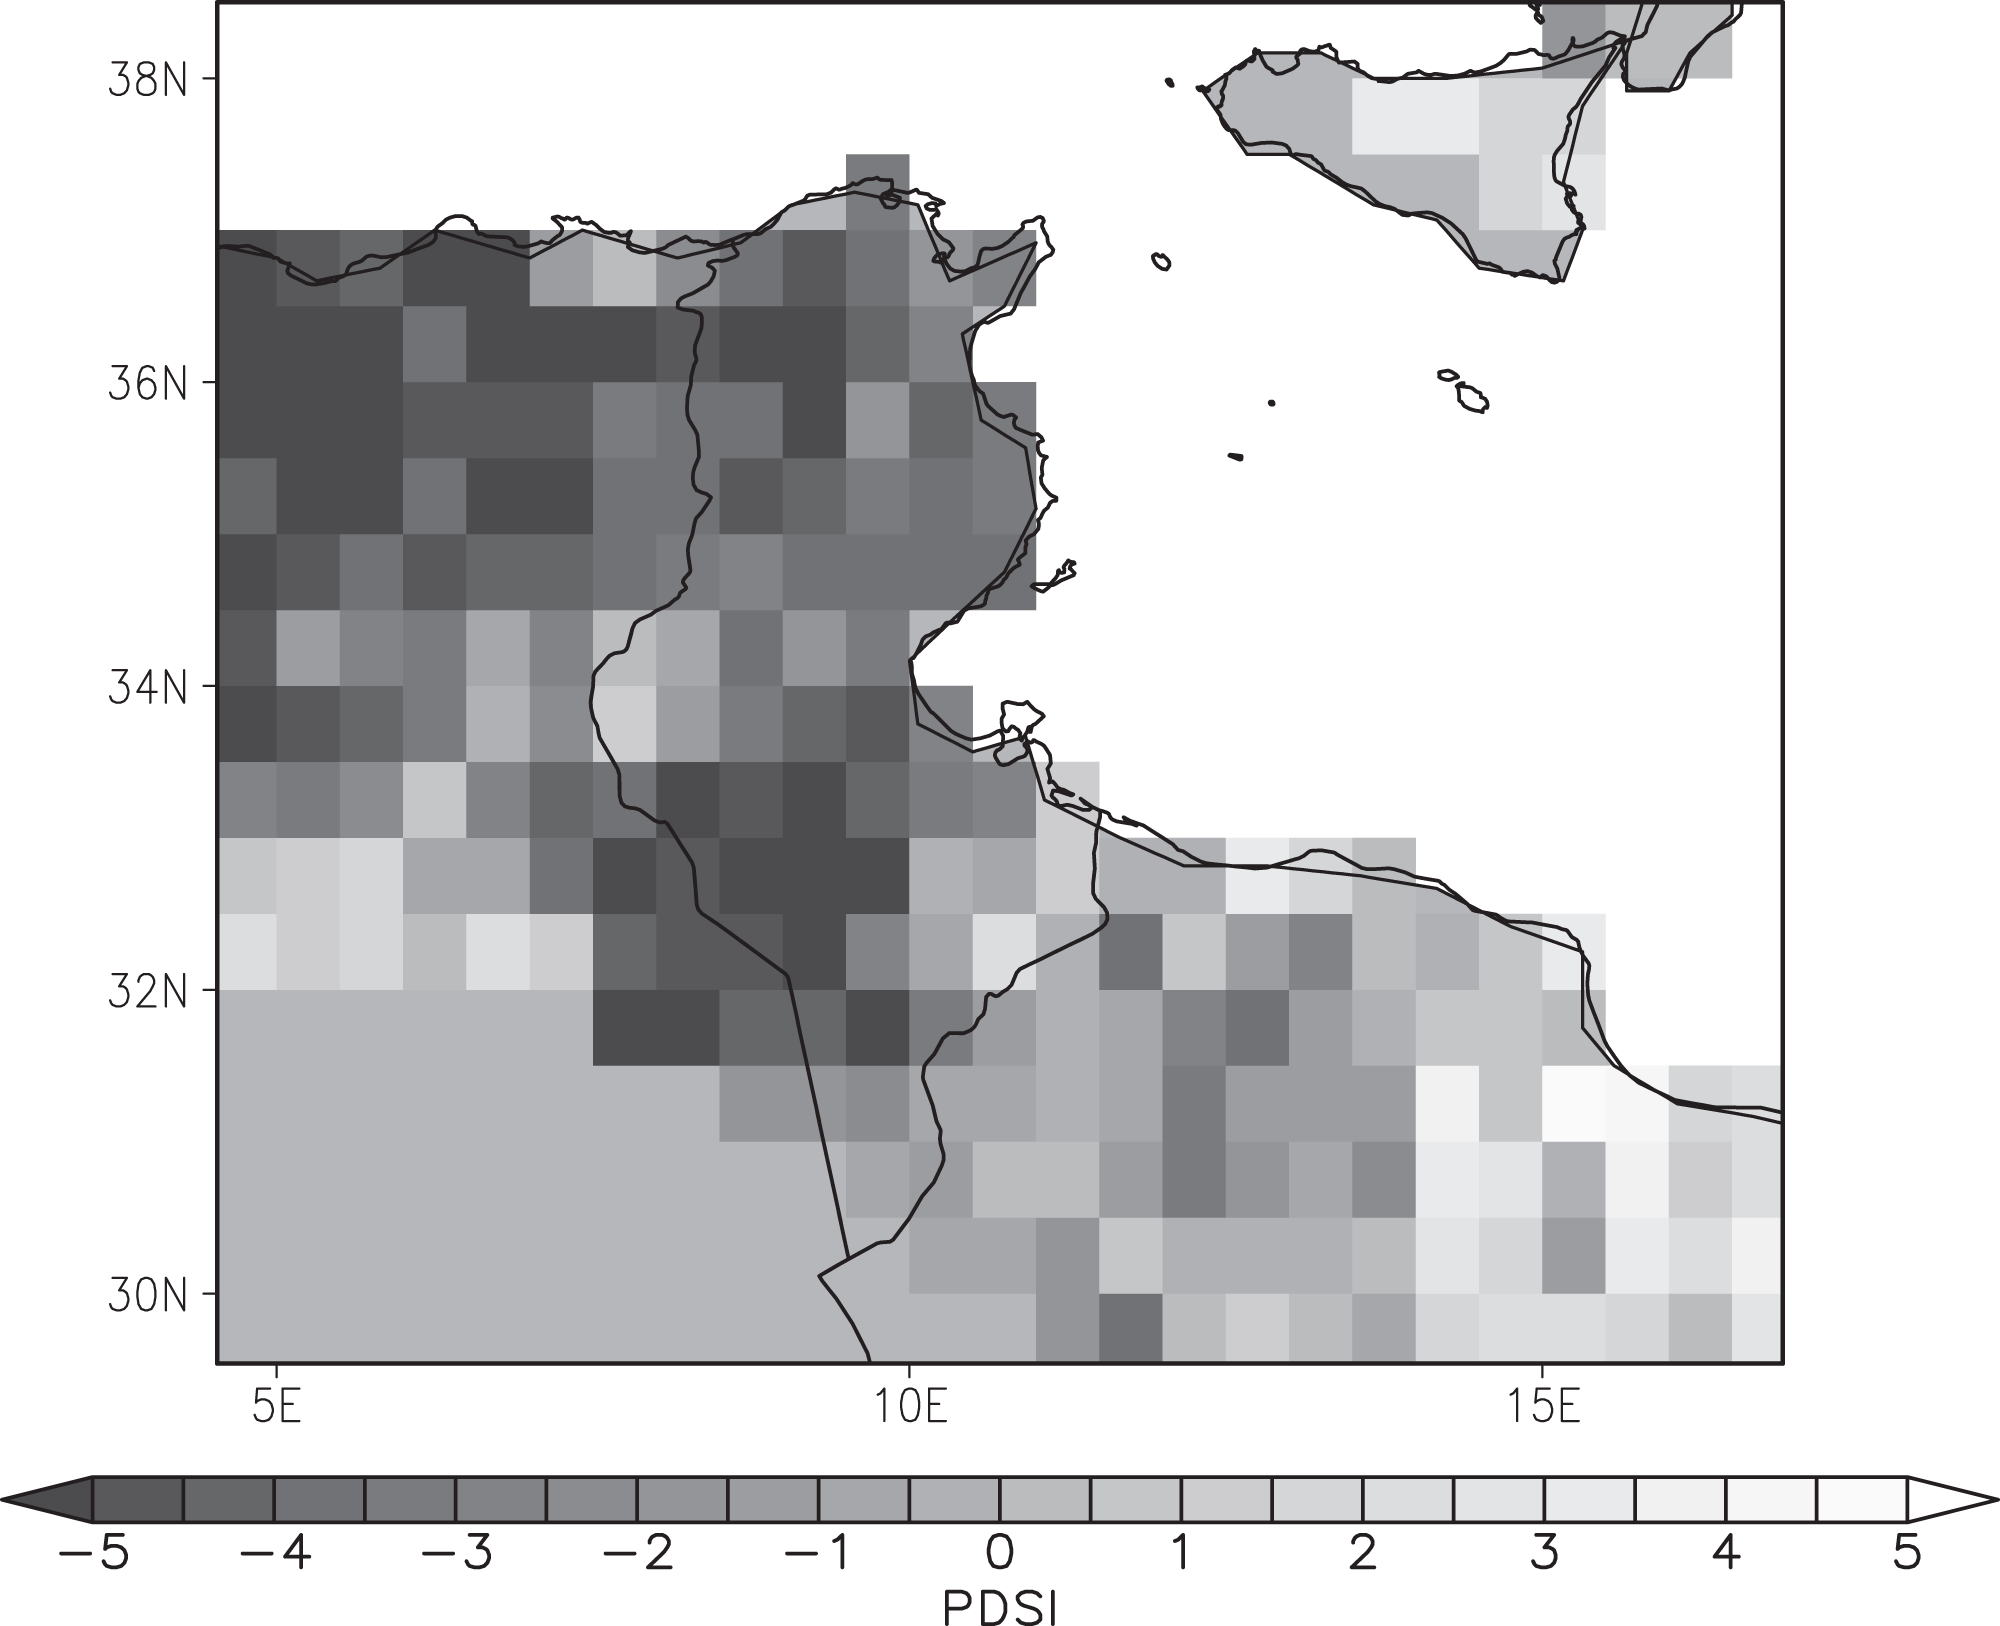 Figure 4: A map shows widespread drought in Ifriqiya in 1147—much worse than the average drought shown in figure 3. Palmer Drought Severity Index readings indicate a severe lack of rainfall during the summer months of this year.